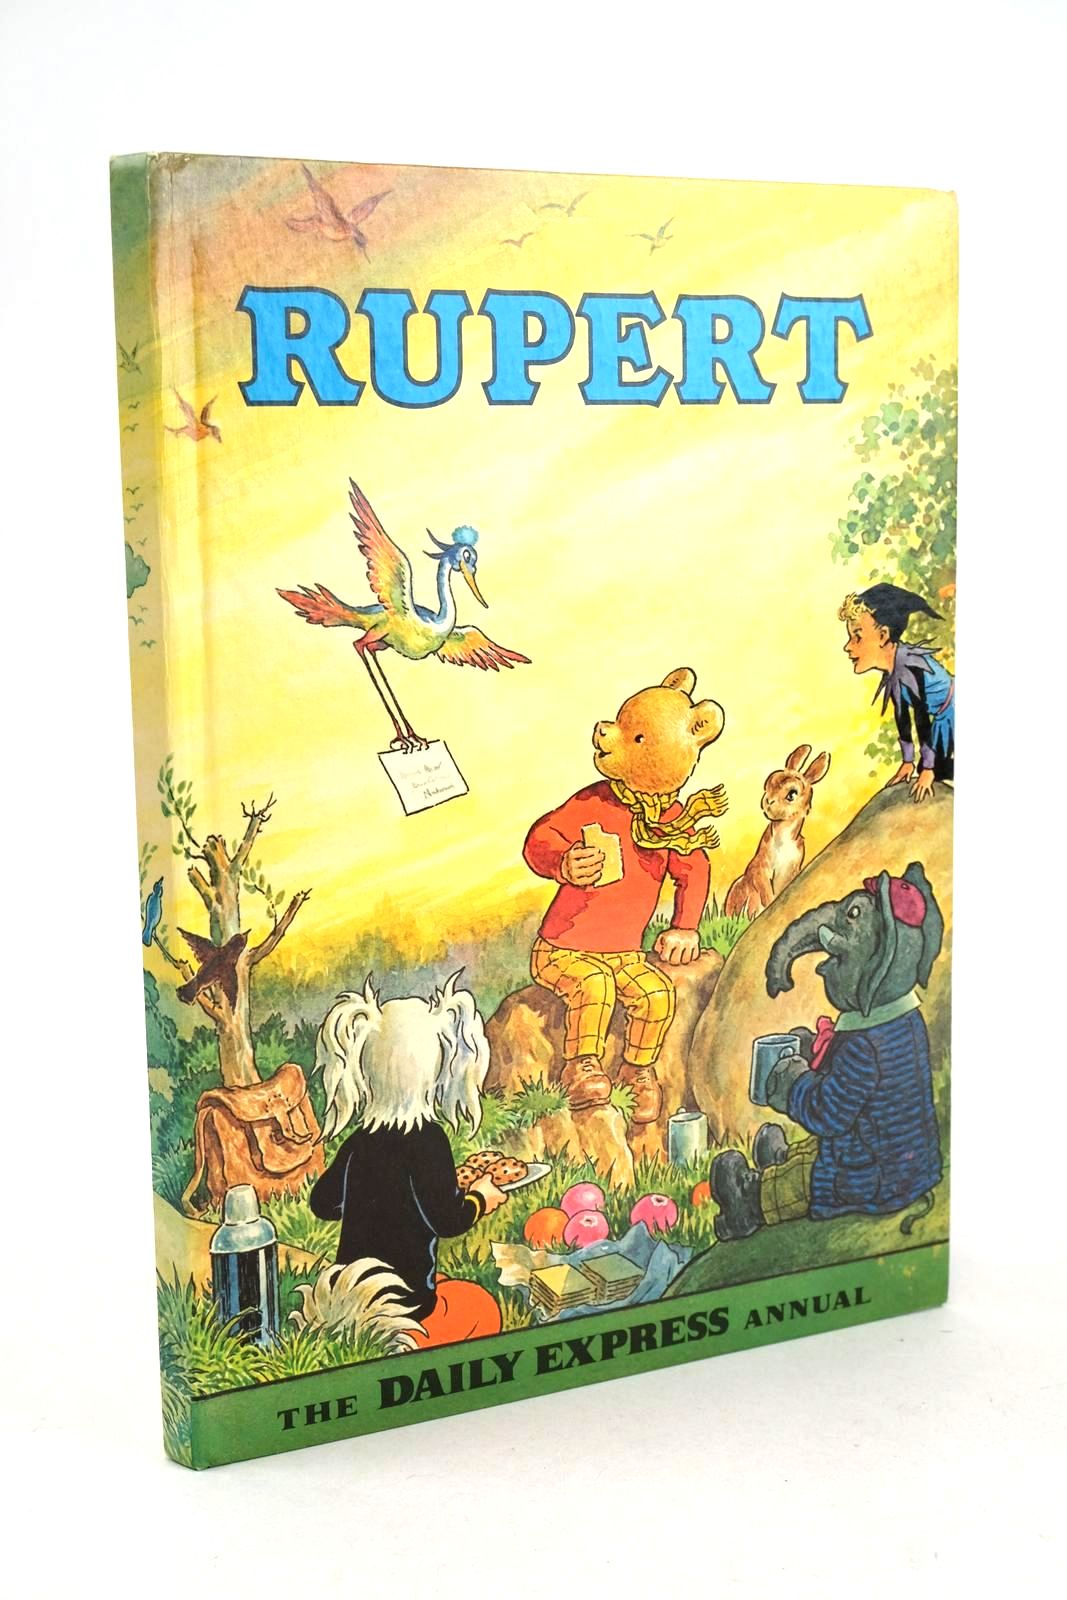 Photo of RUPERT ANNUAL 1972 written by Bestall, Alfred illustrated by Bestall, Alfred published by Daily Express (STOCK CODE: 1326391)  for sale by Stella & Rose's Books